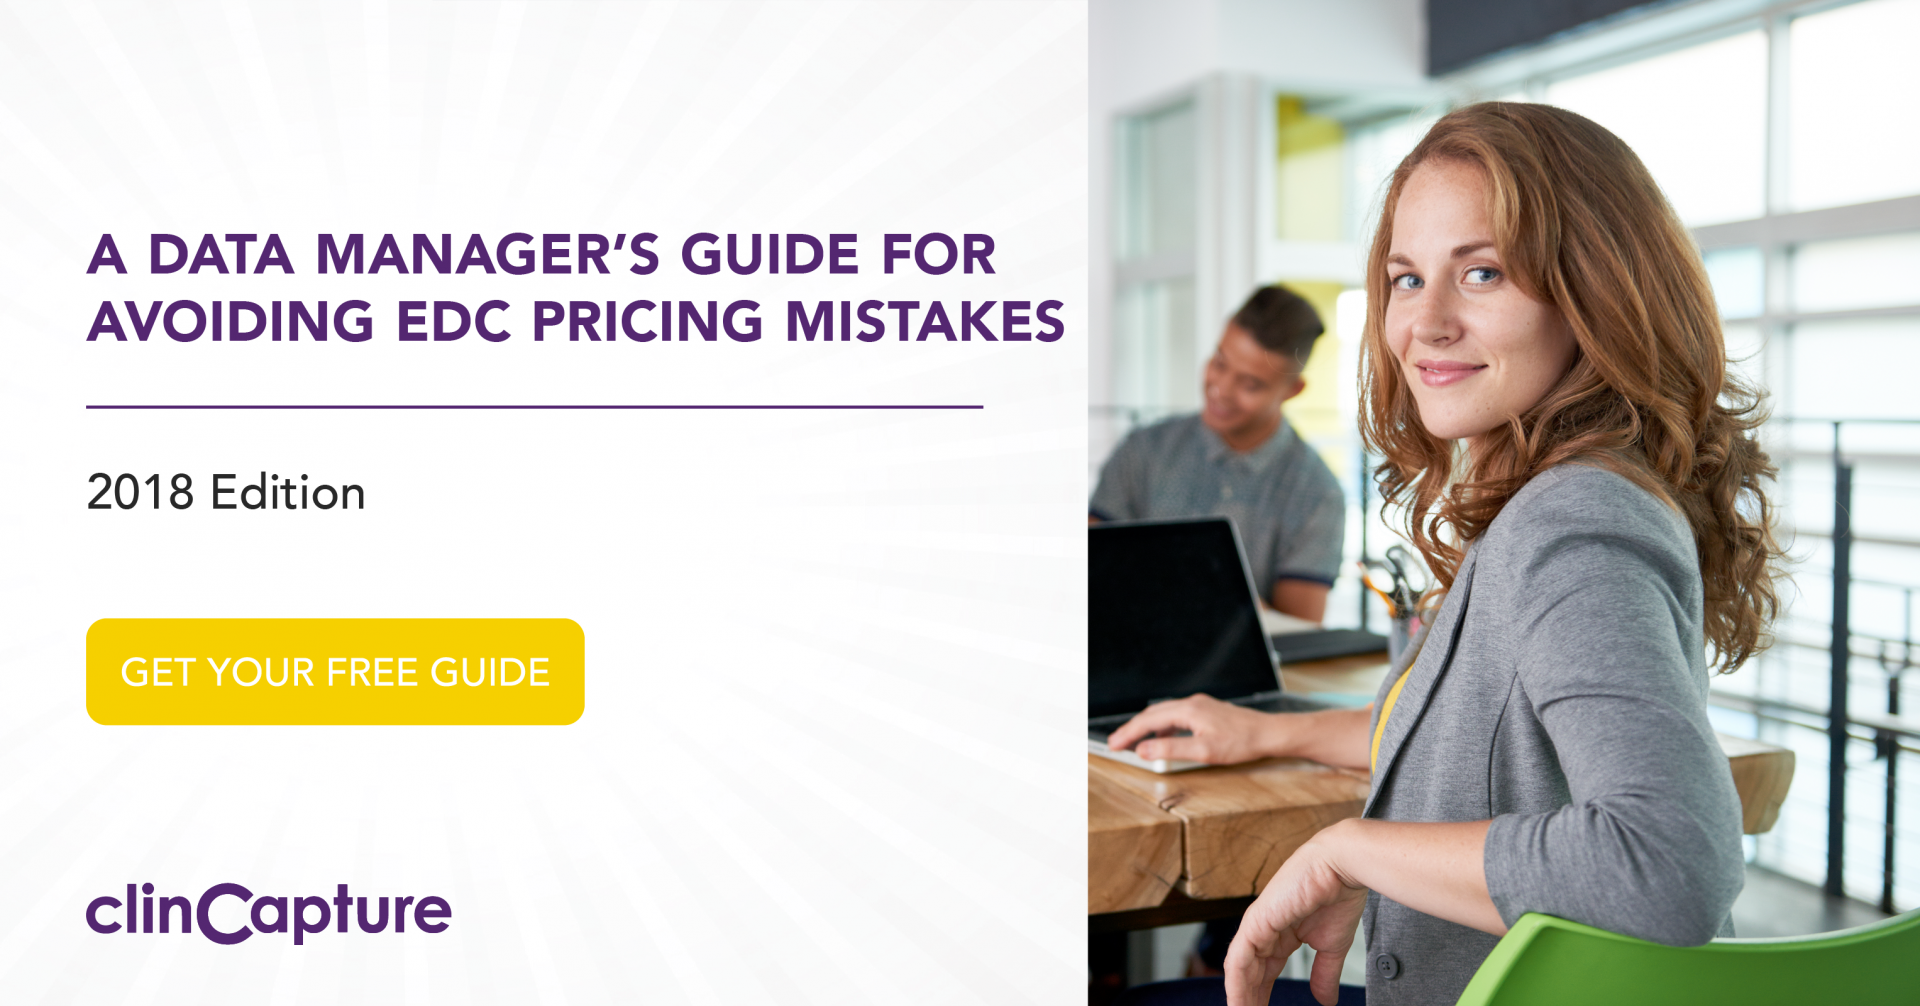 A data manager's guide to avoiding pricing mistakes